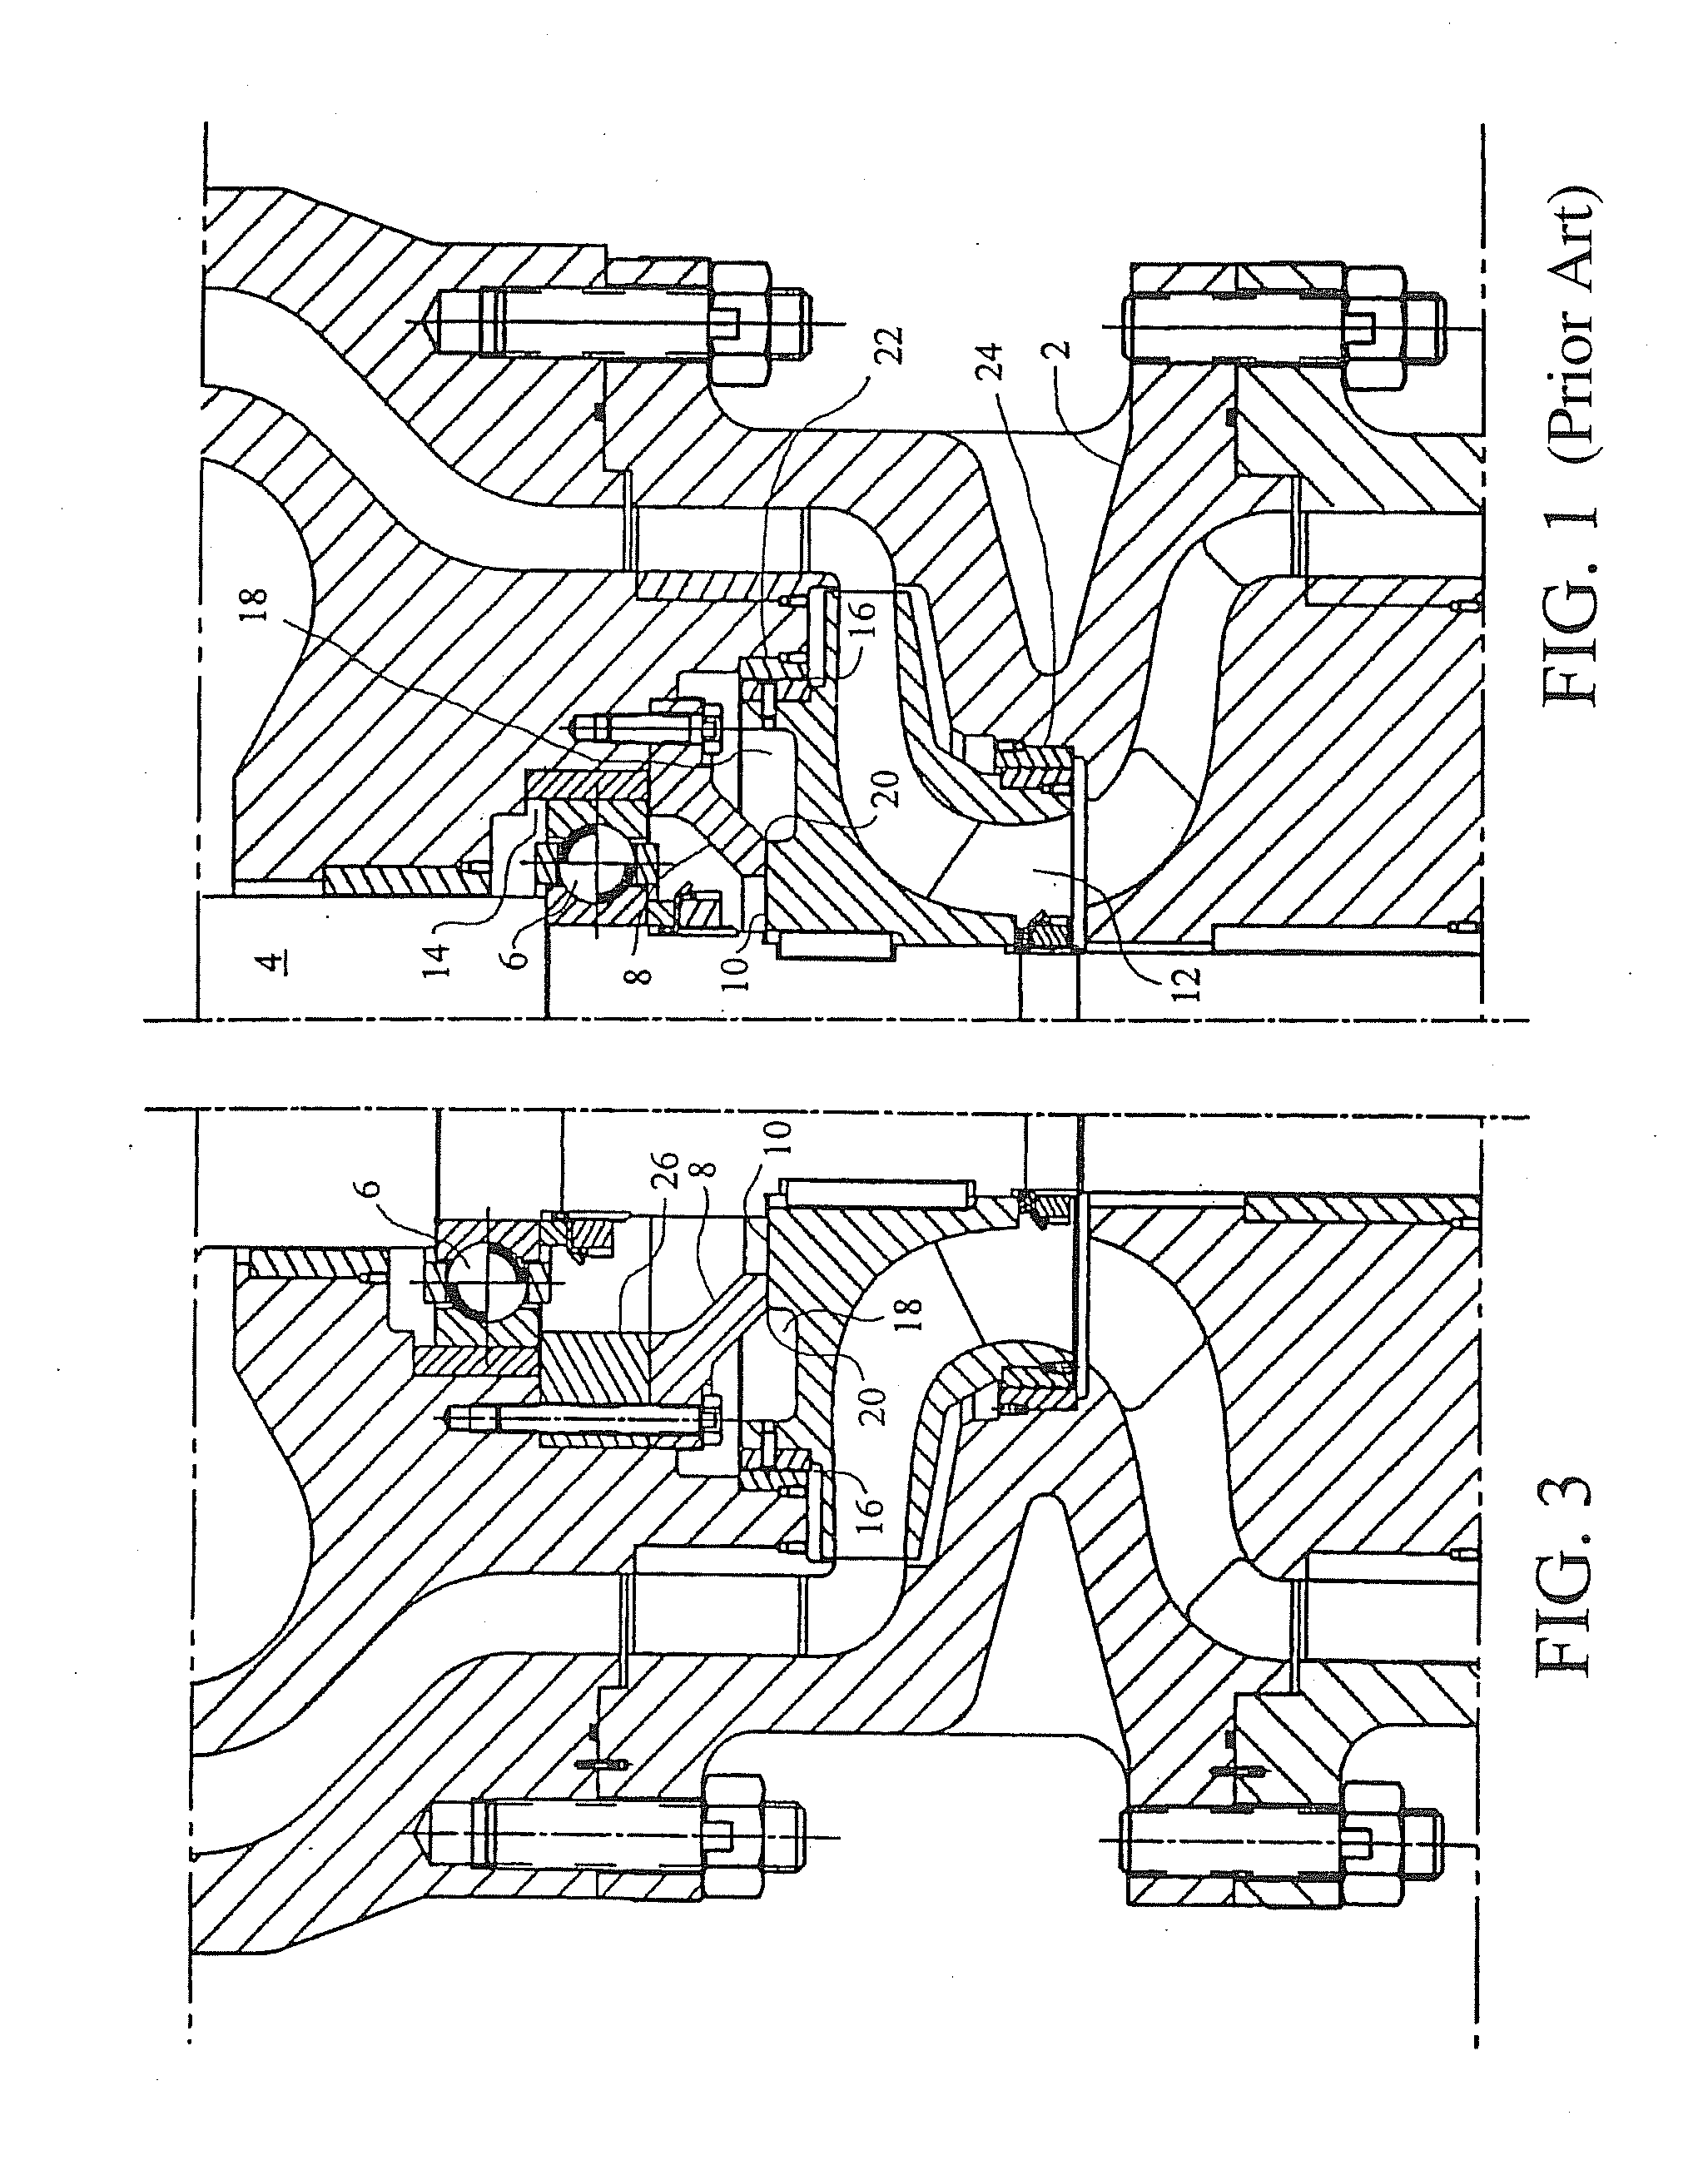 Thrust balancing device for cryogenic fluid machinery